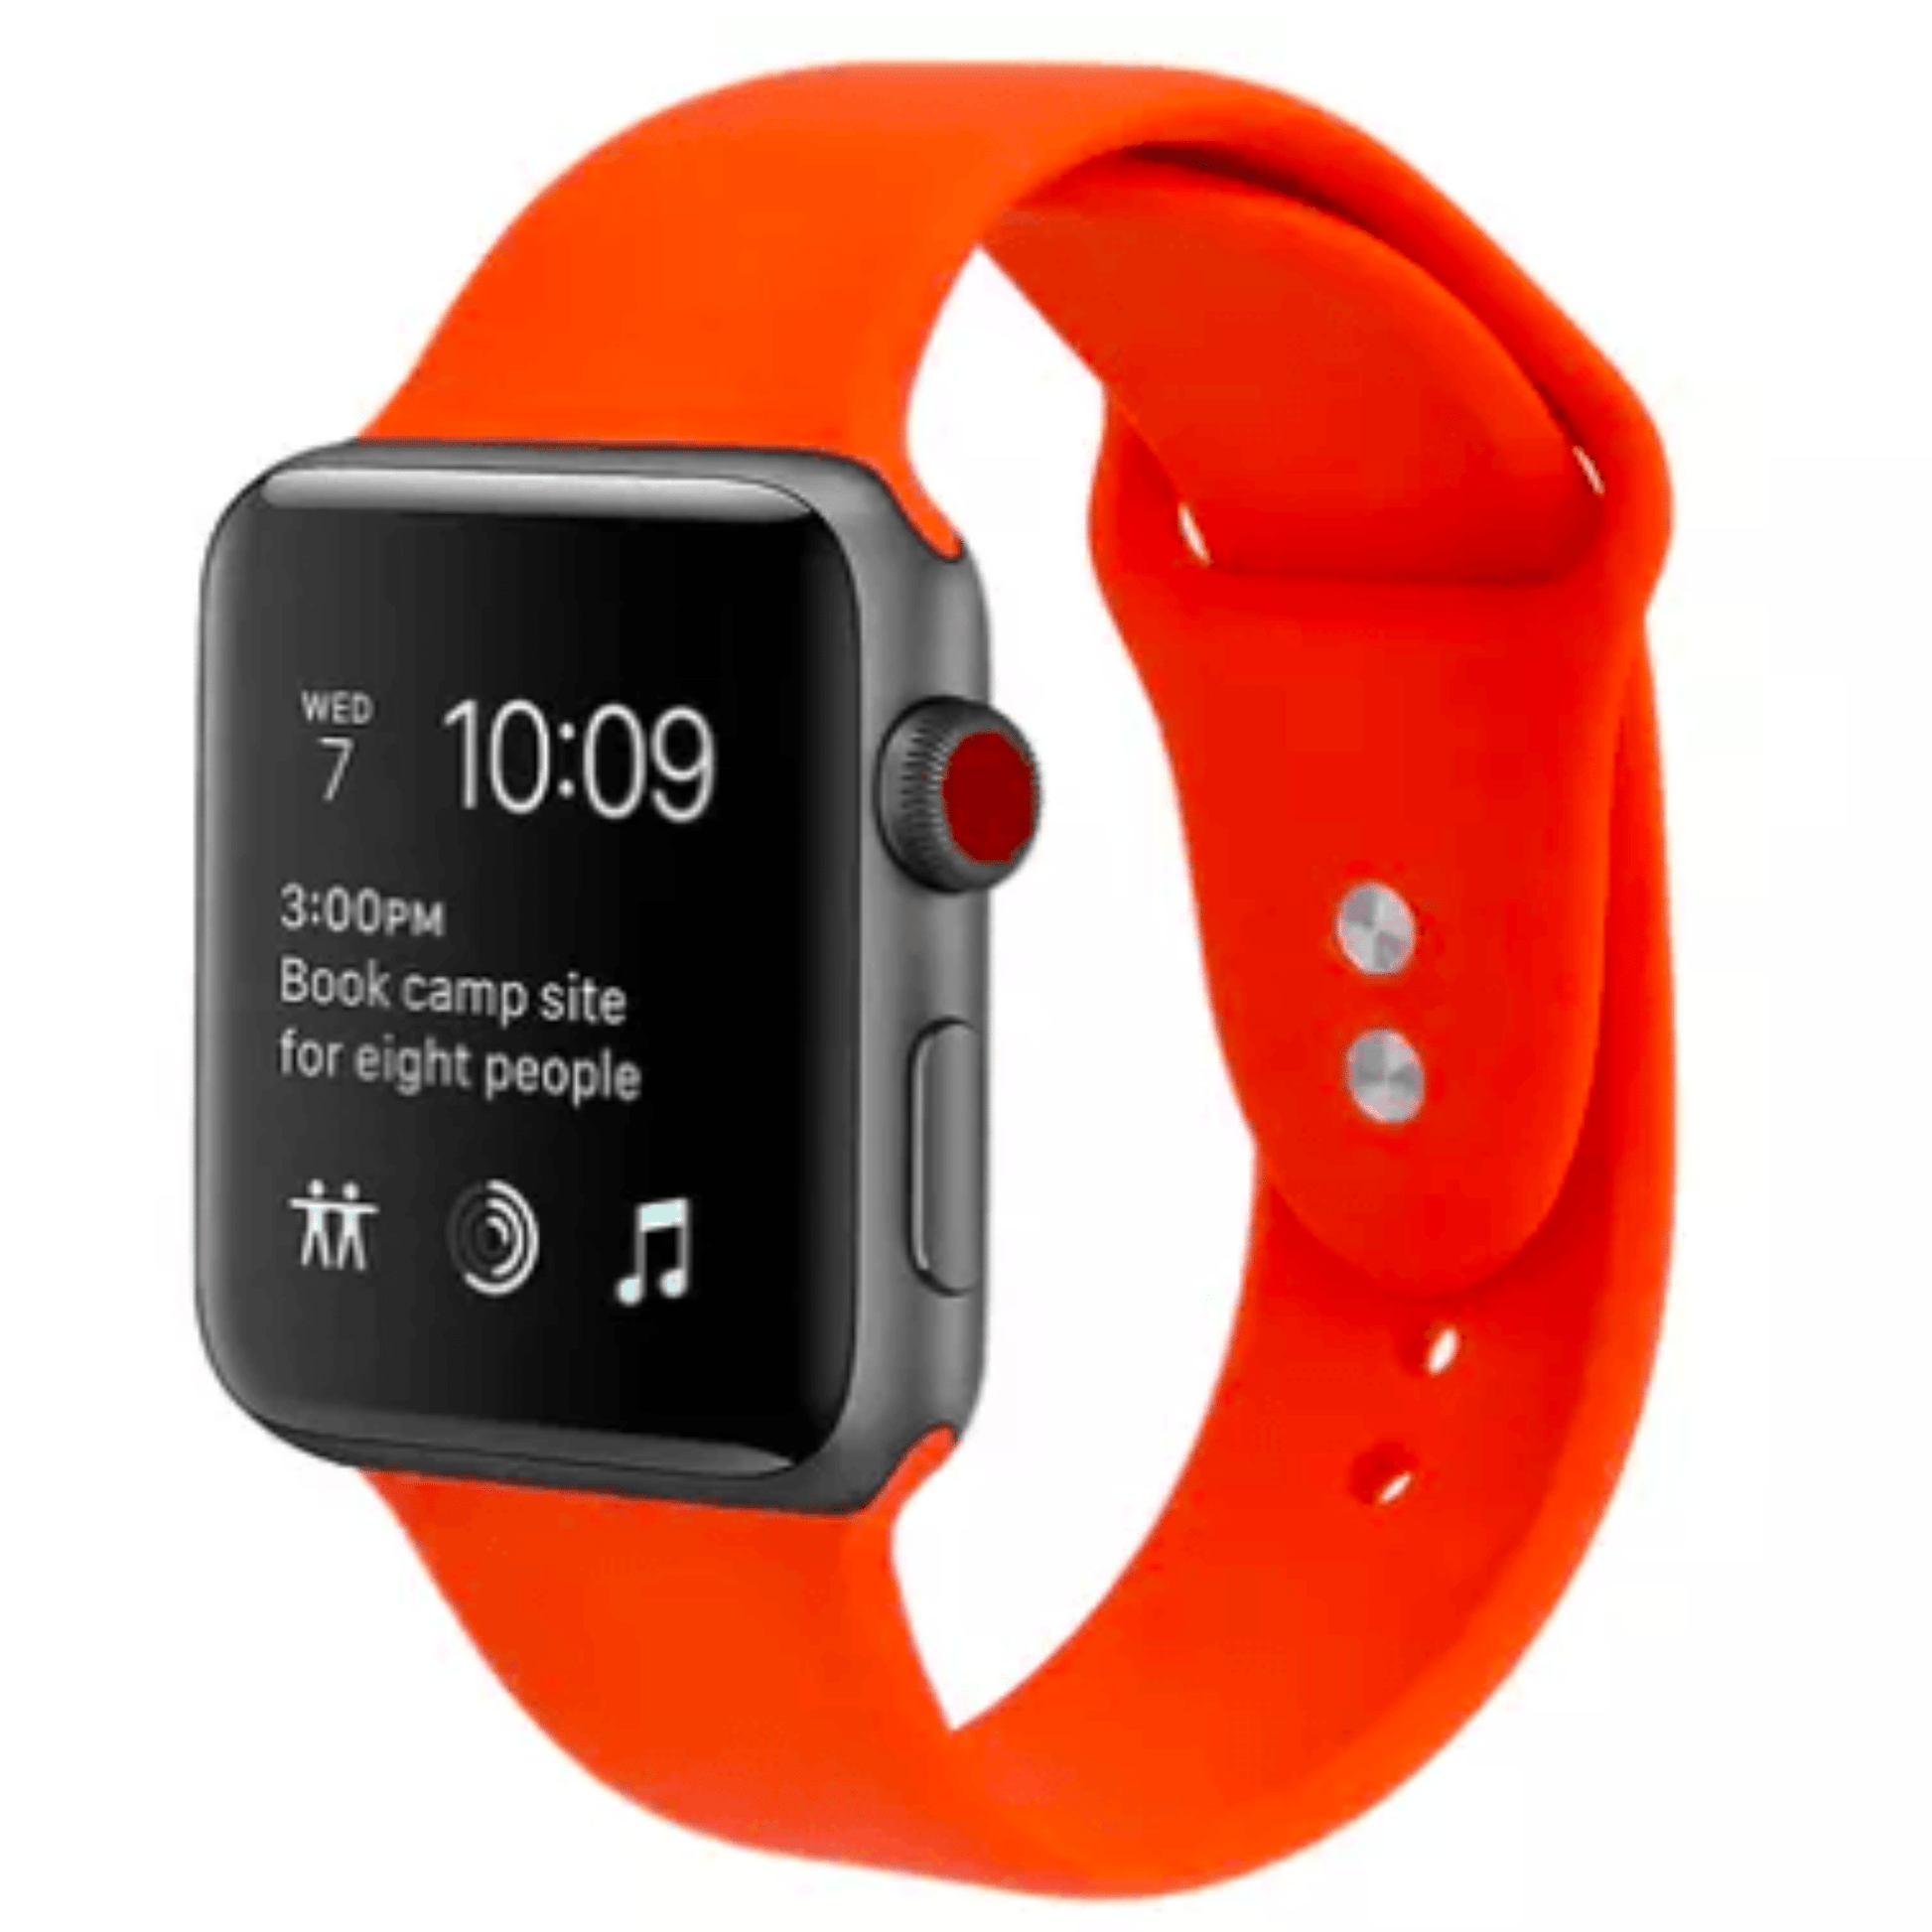 Silicone Sport Replacement Band for Apple Watch Orange Apple Watch Band Elements Watches